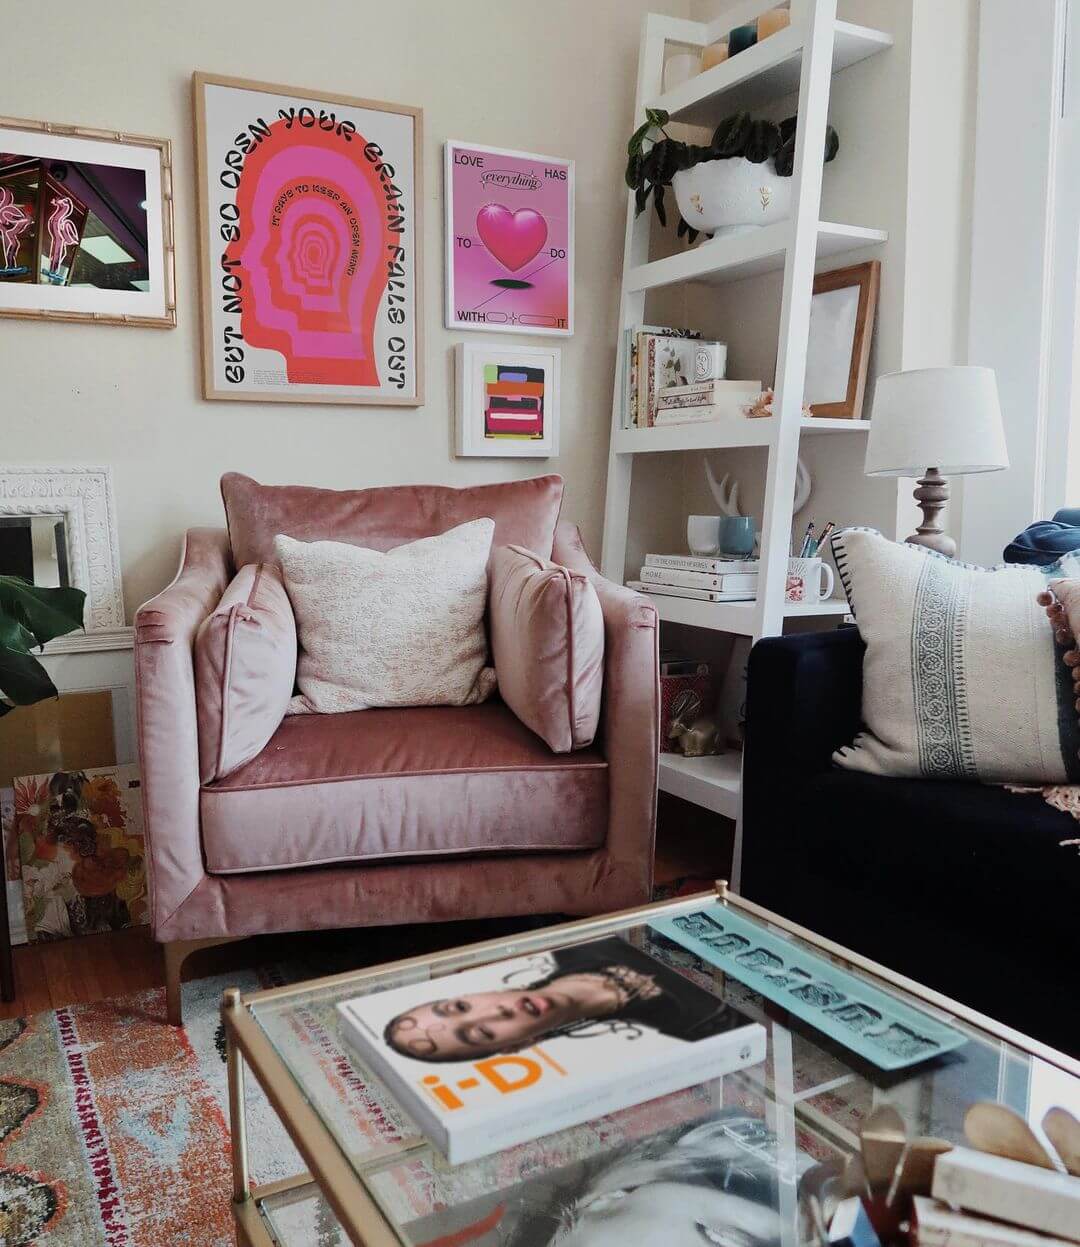 Gallery Wall With Pink And Red Artworks In A Room With A Pink Chair